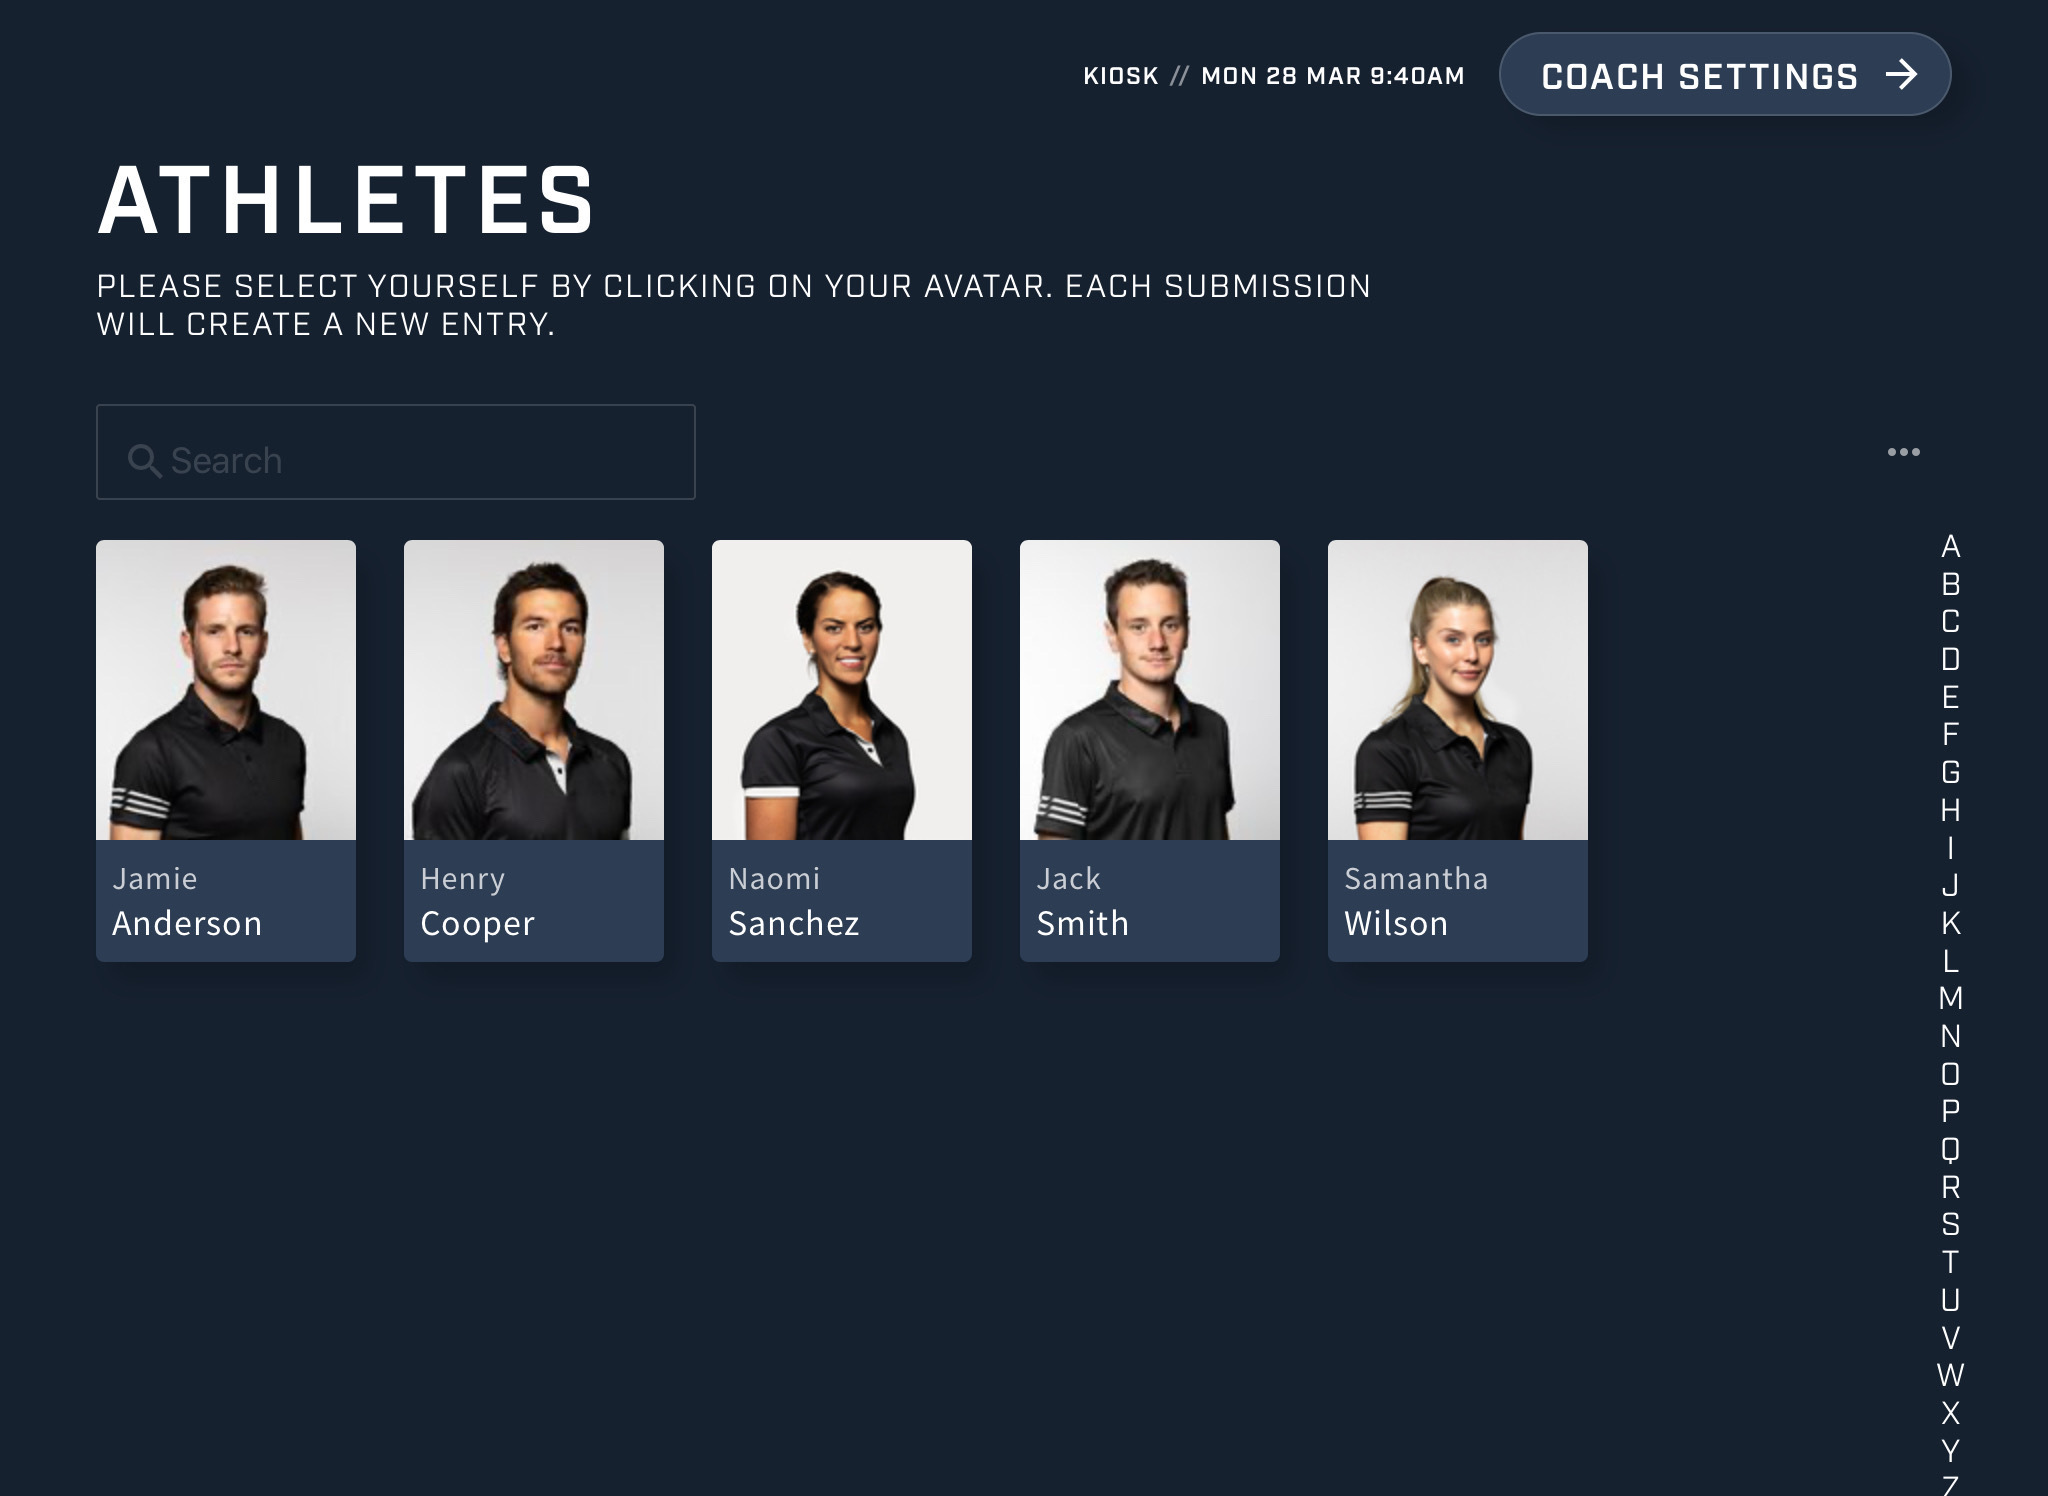 A screenshot showing an example of the athlete selection screen in the athlete view of the Smartabase Kiosk app.